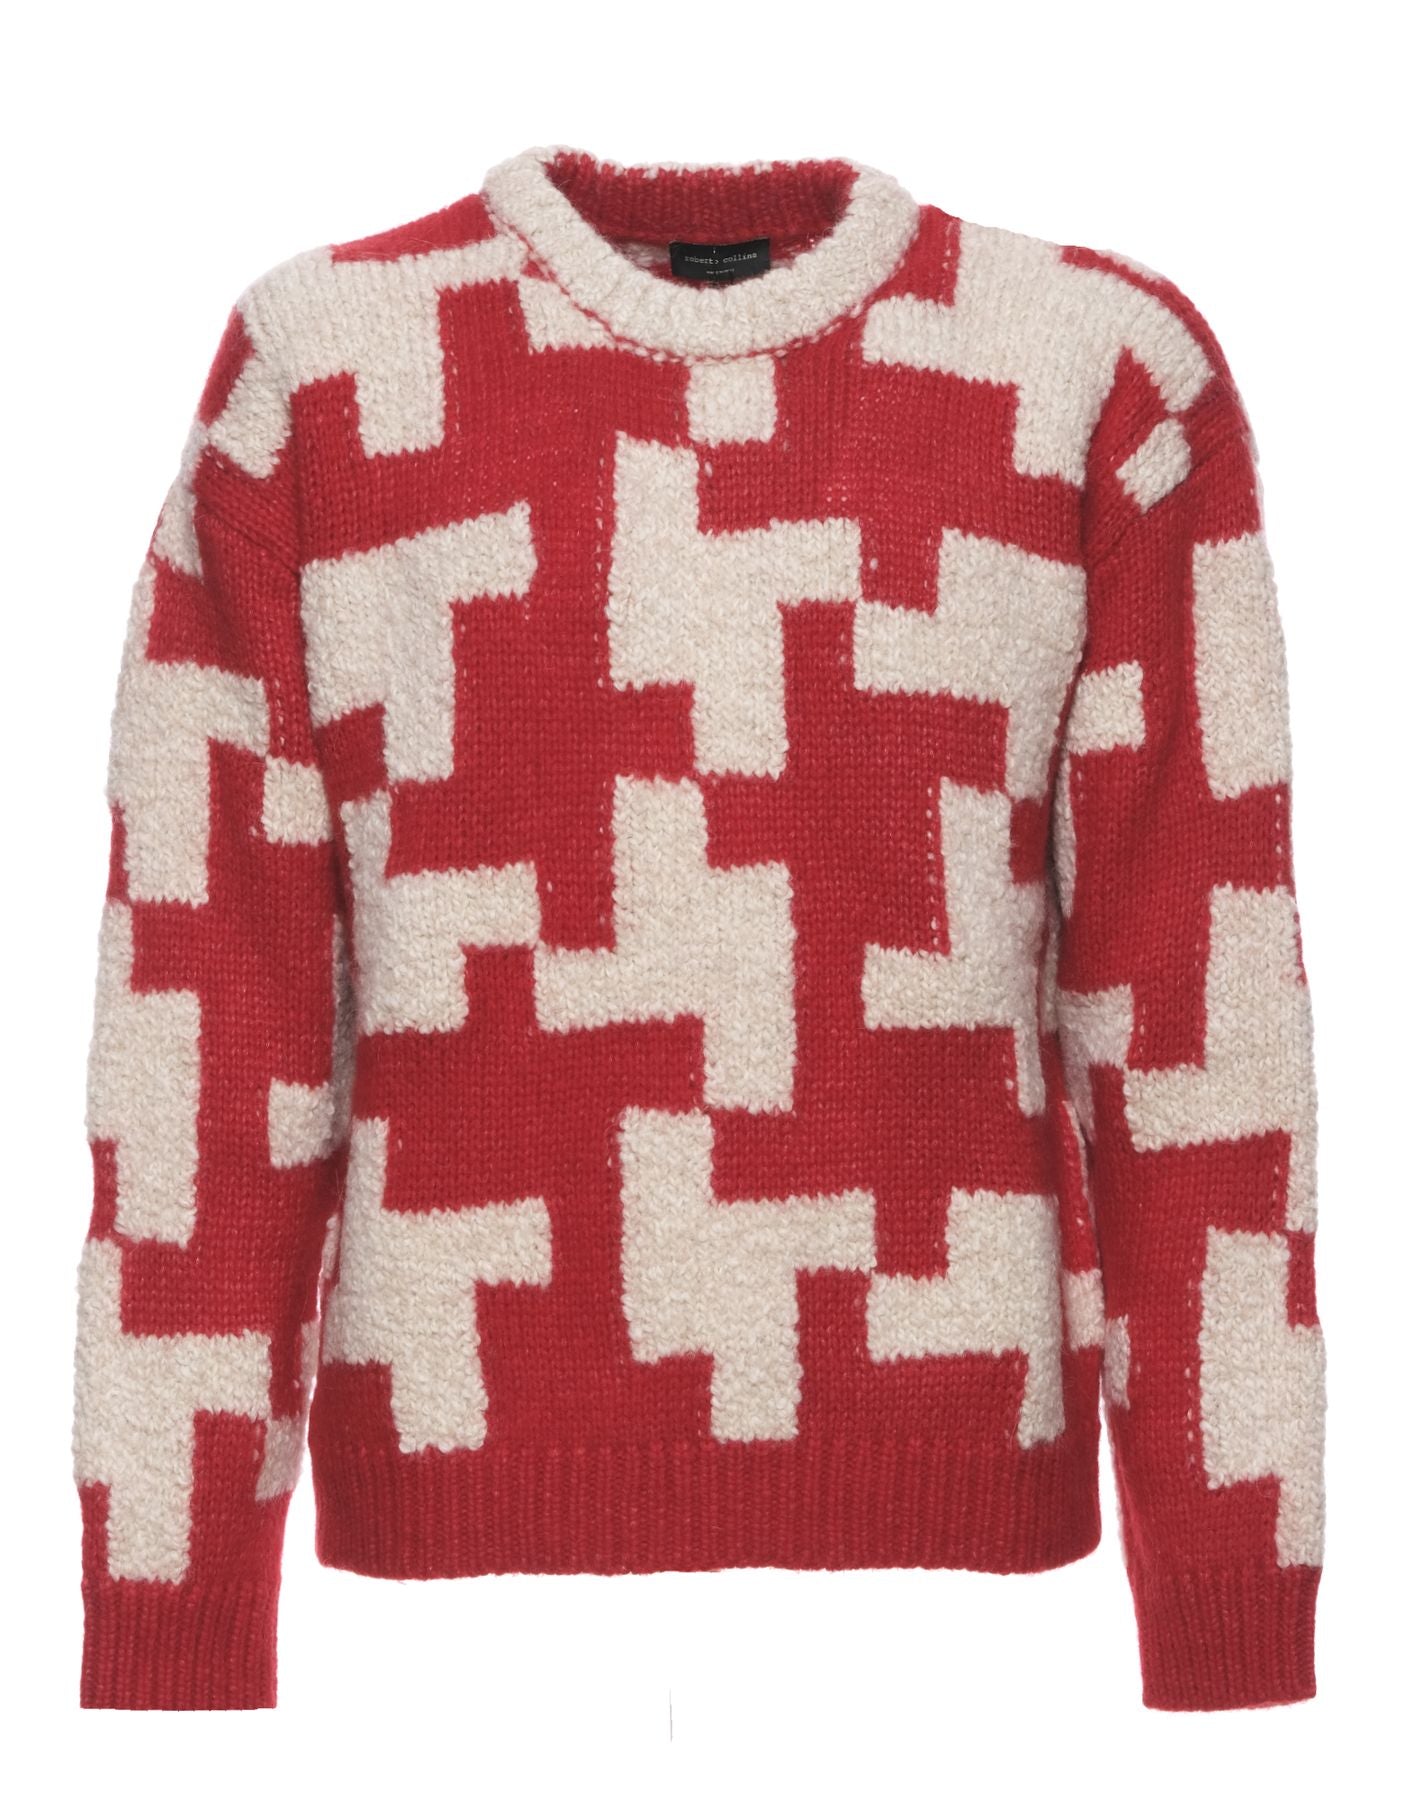 Pull pour homme RP46001 38 RED ECRU ROBERTO COLLINA